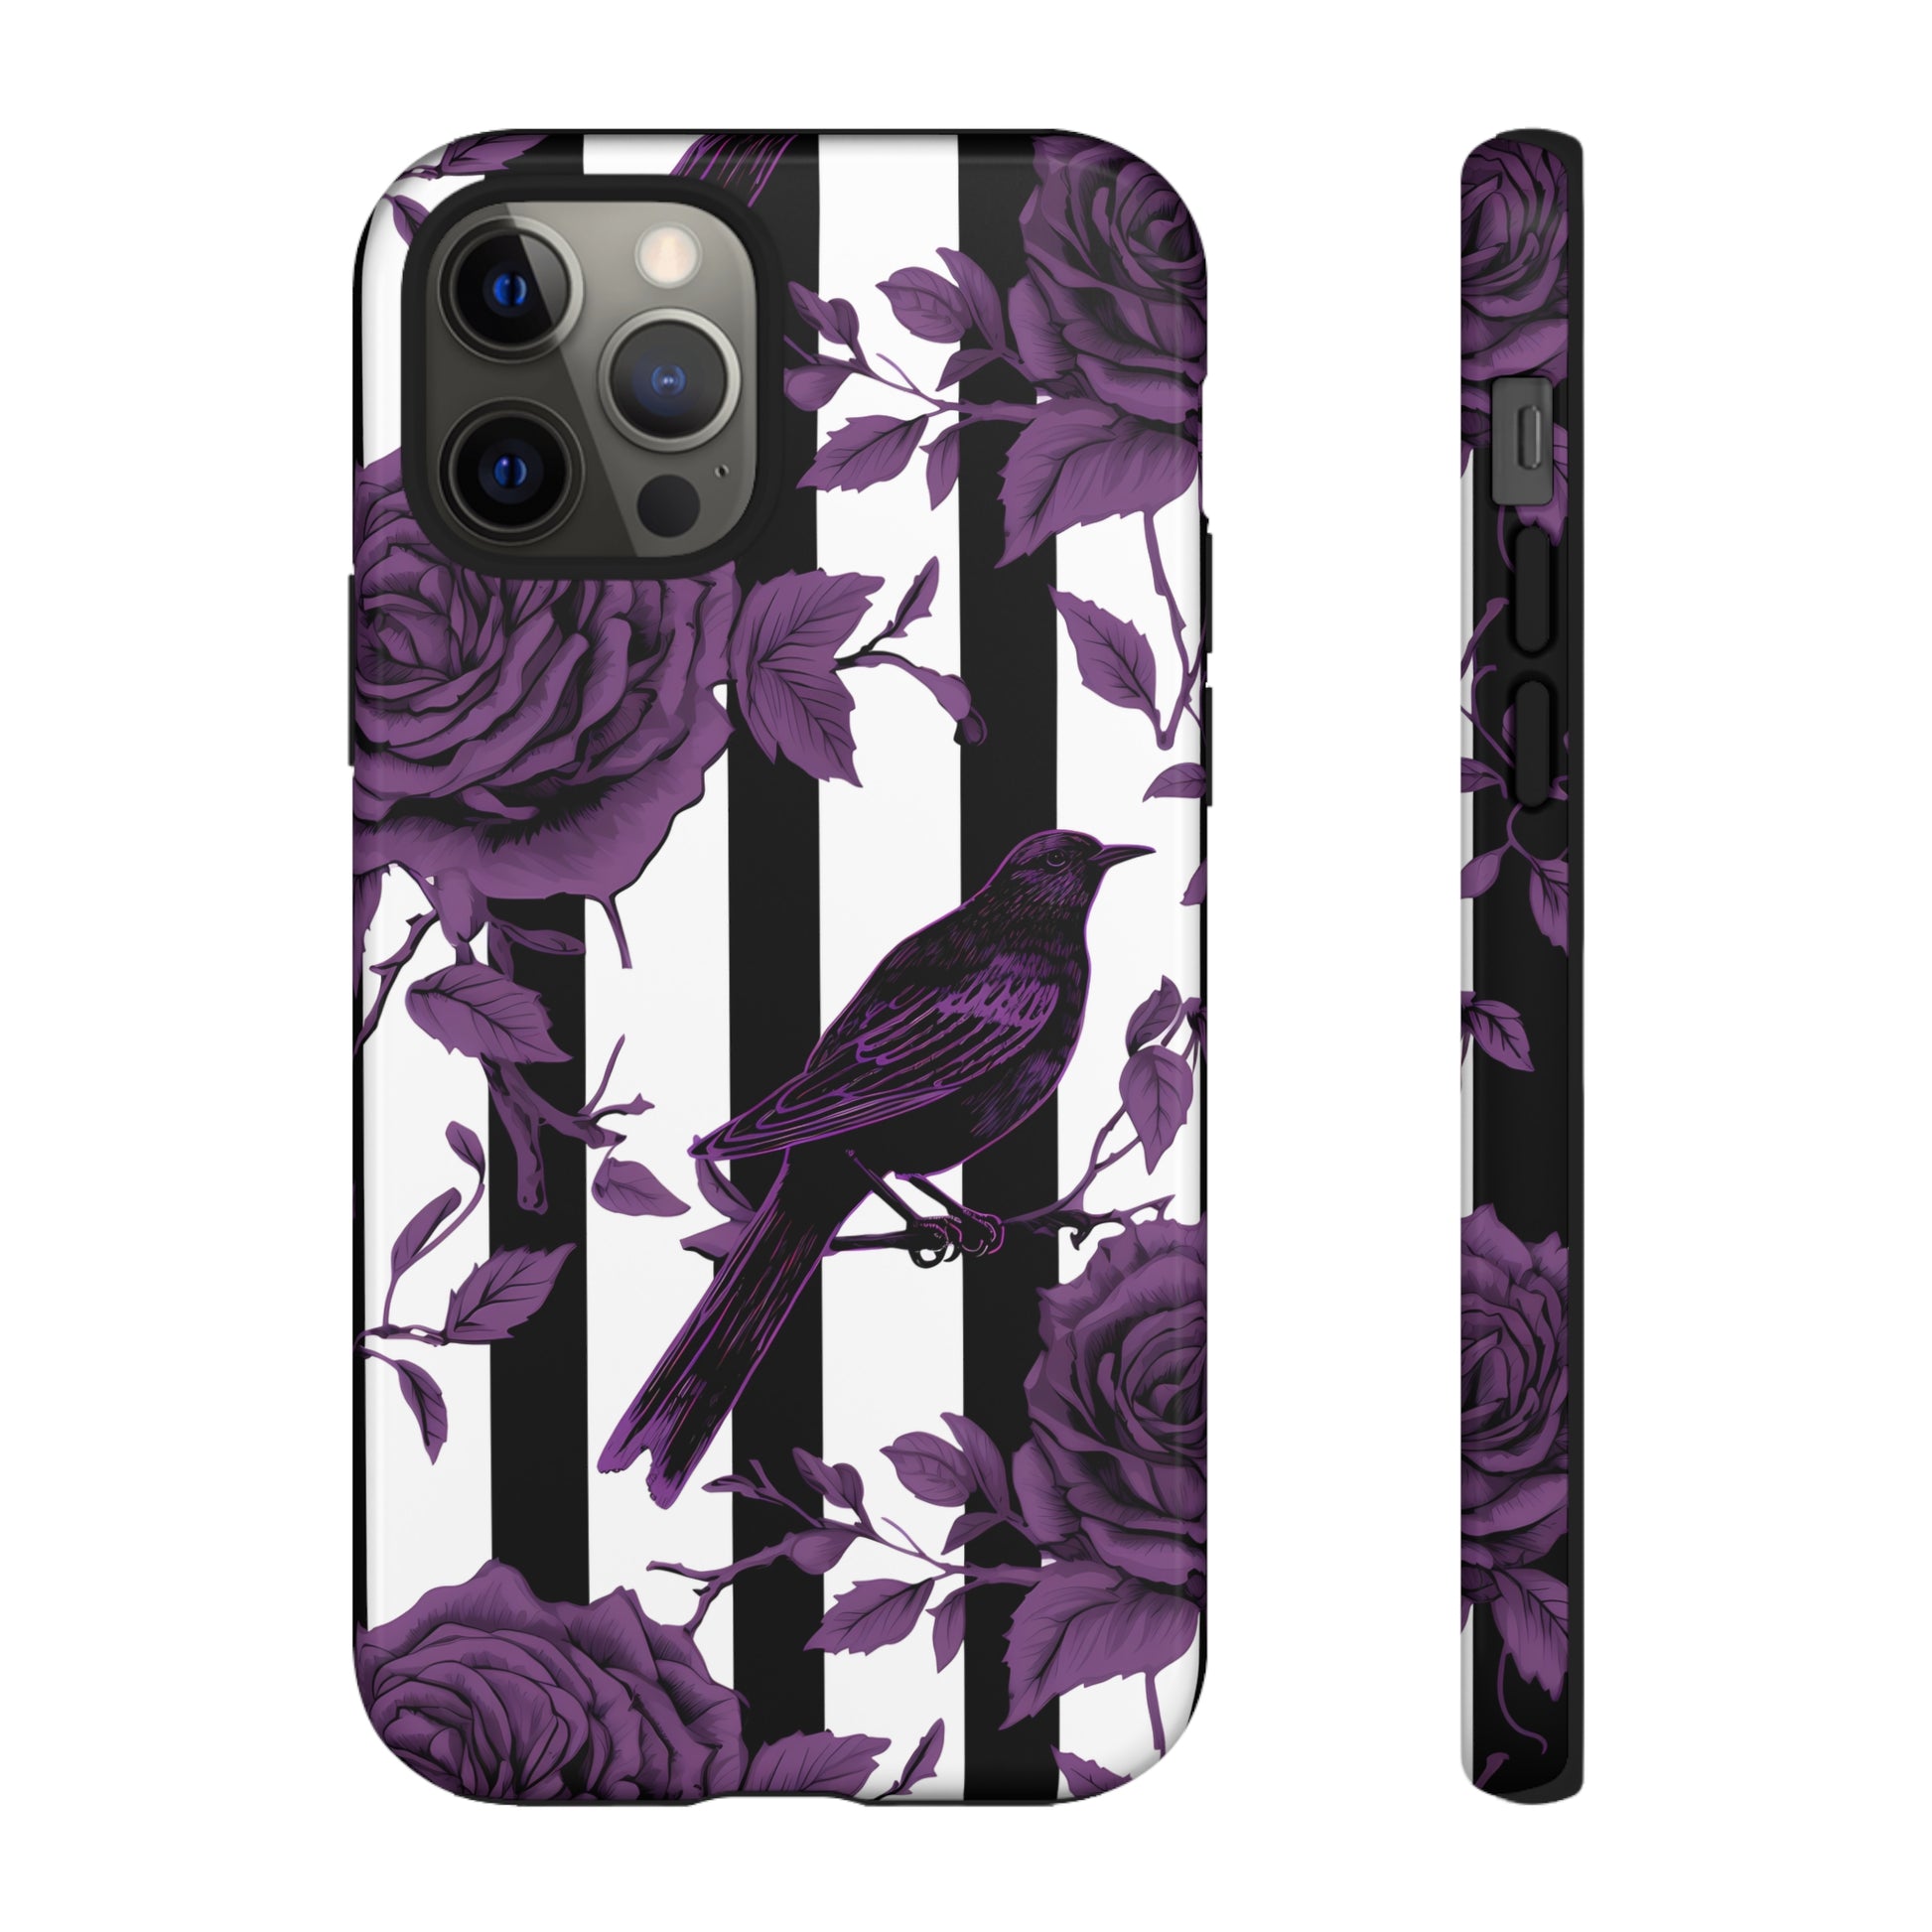 Striped Crows and Roses Tough Cases for iPhone Samsung Google PhonesPhone CaseVTZdesignsiPhone 12 ProGlossyAccessoriescrowsGlossy